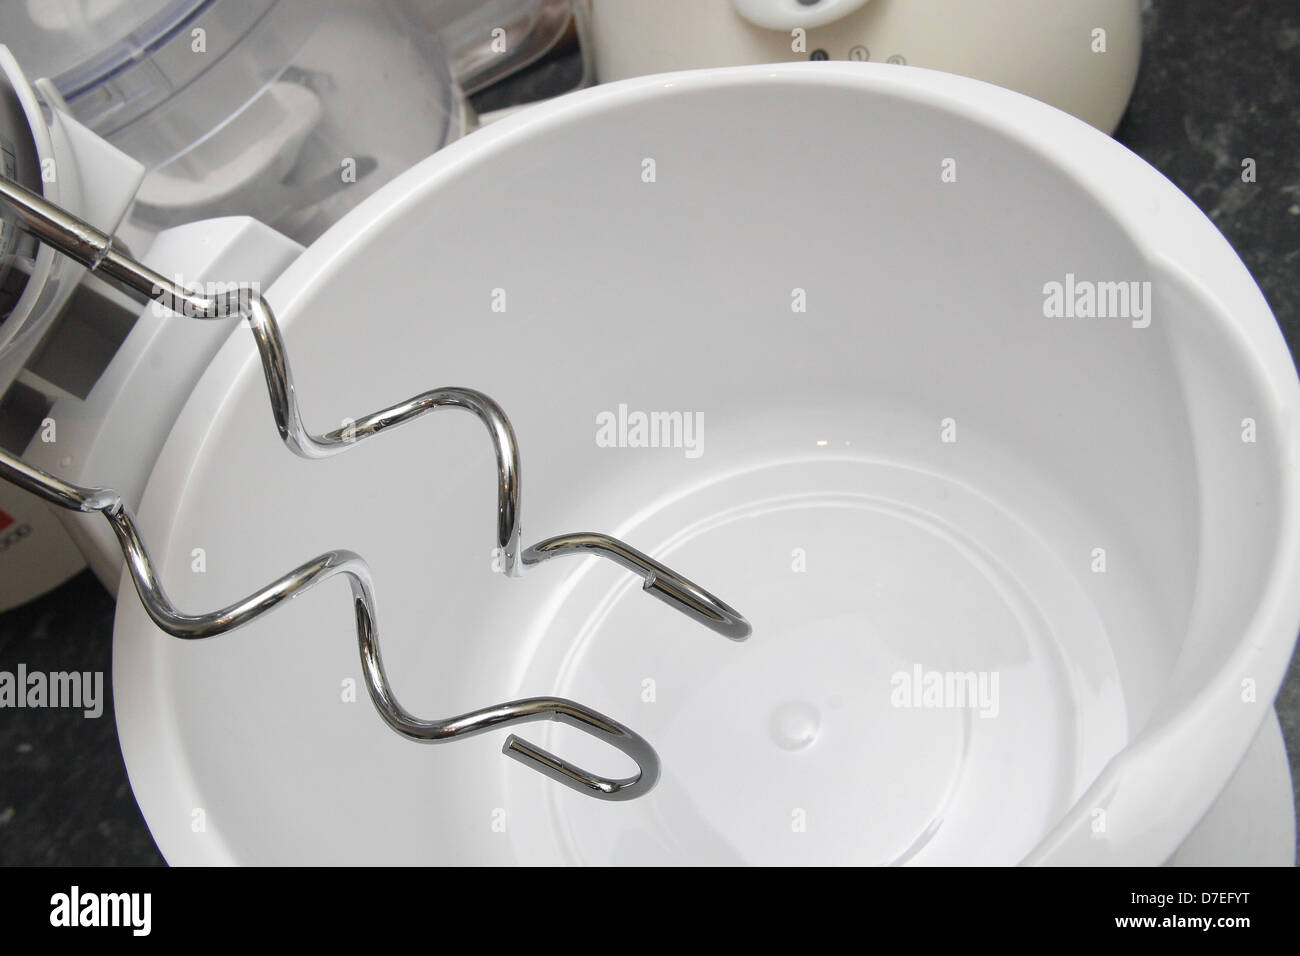 stainless steel dough hooks on white mixing bowl Stock Photo